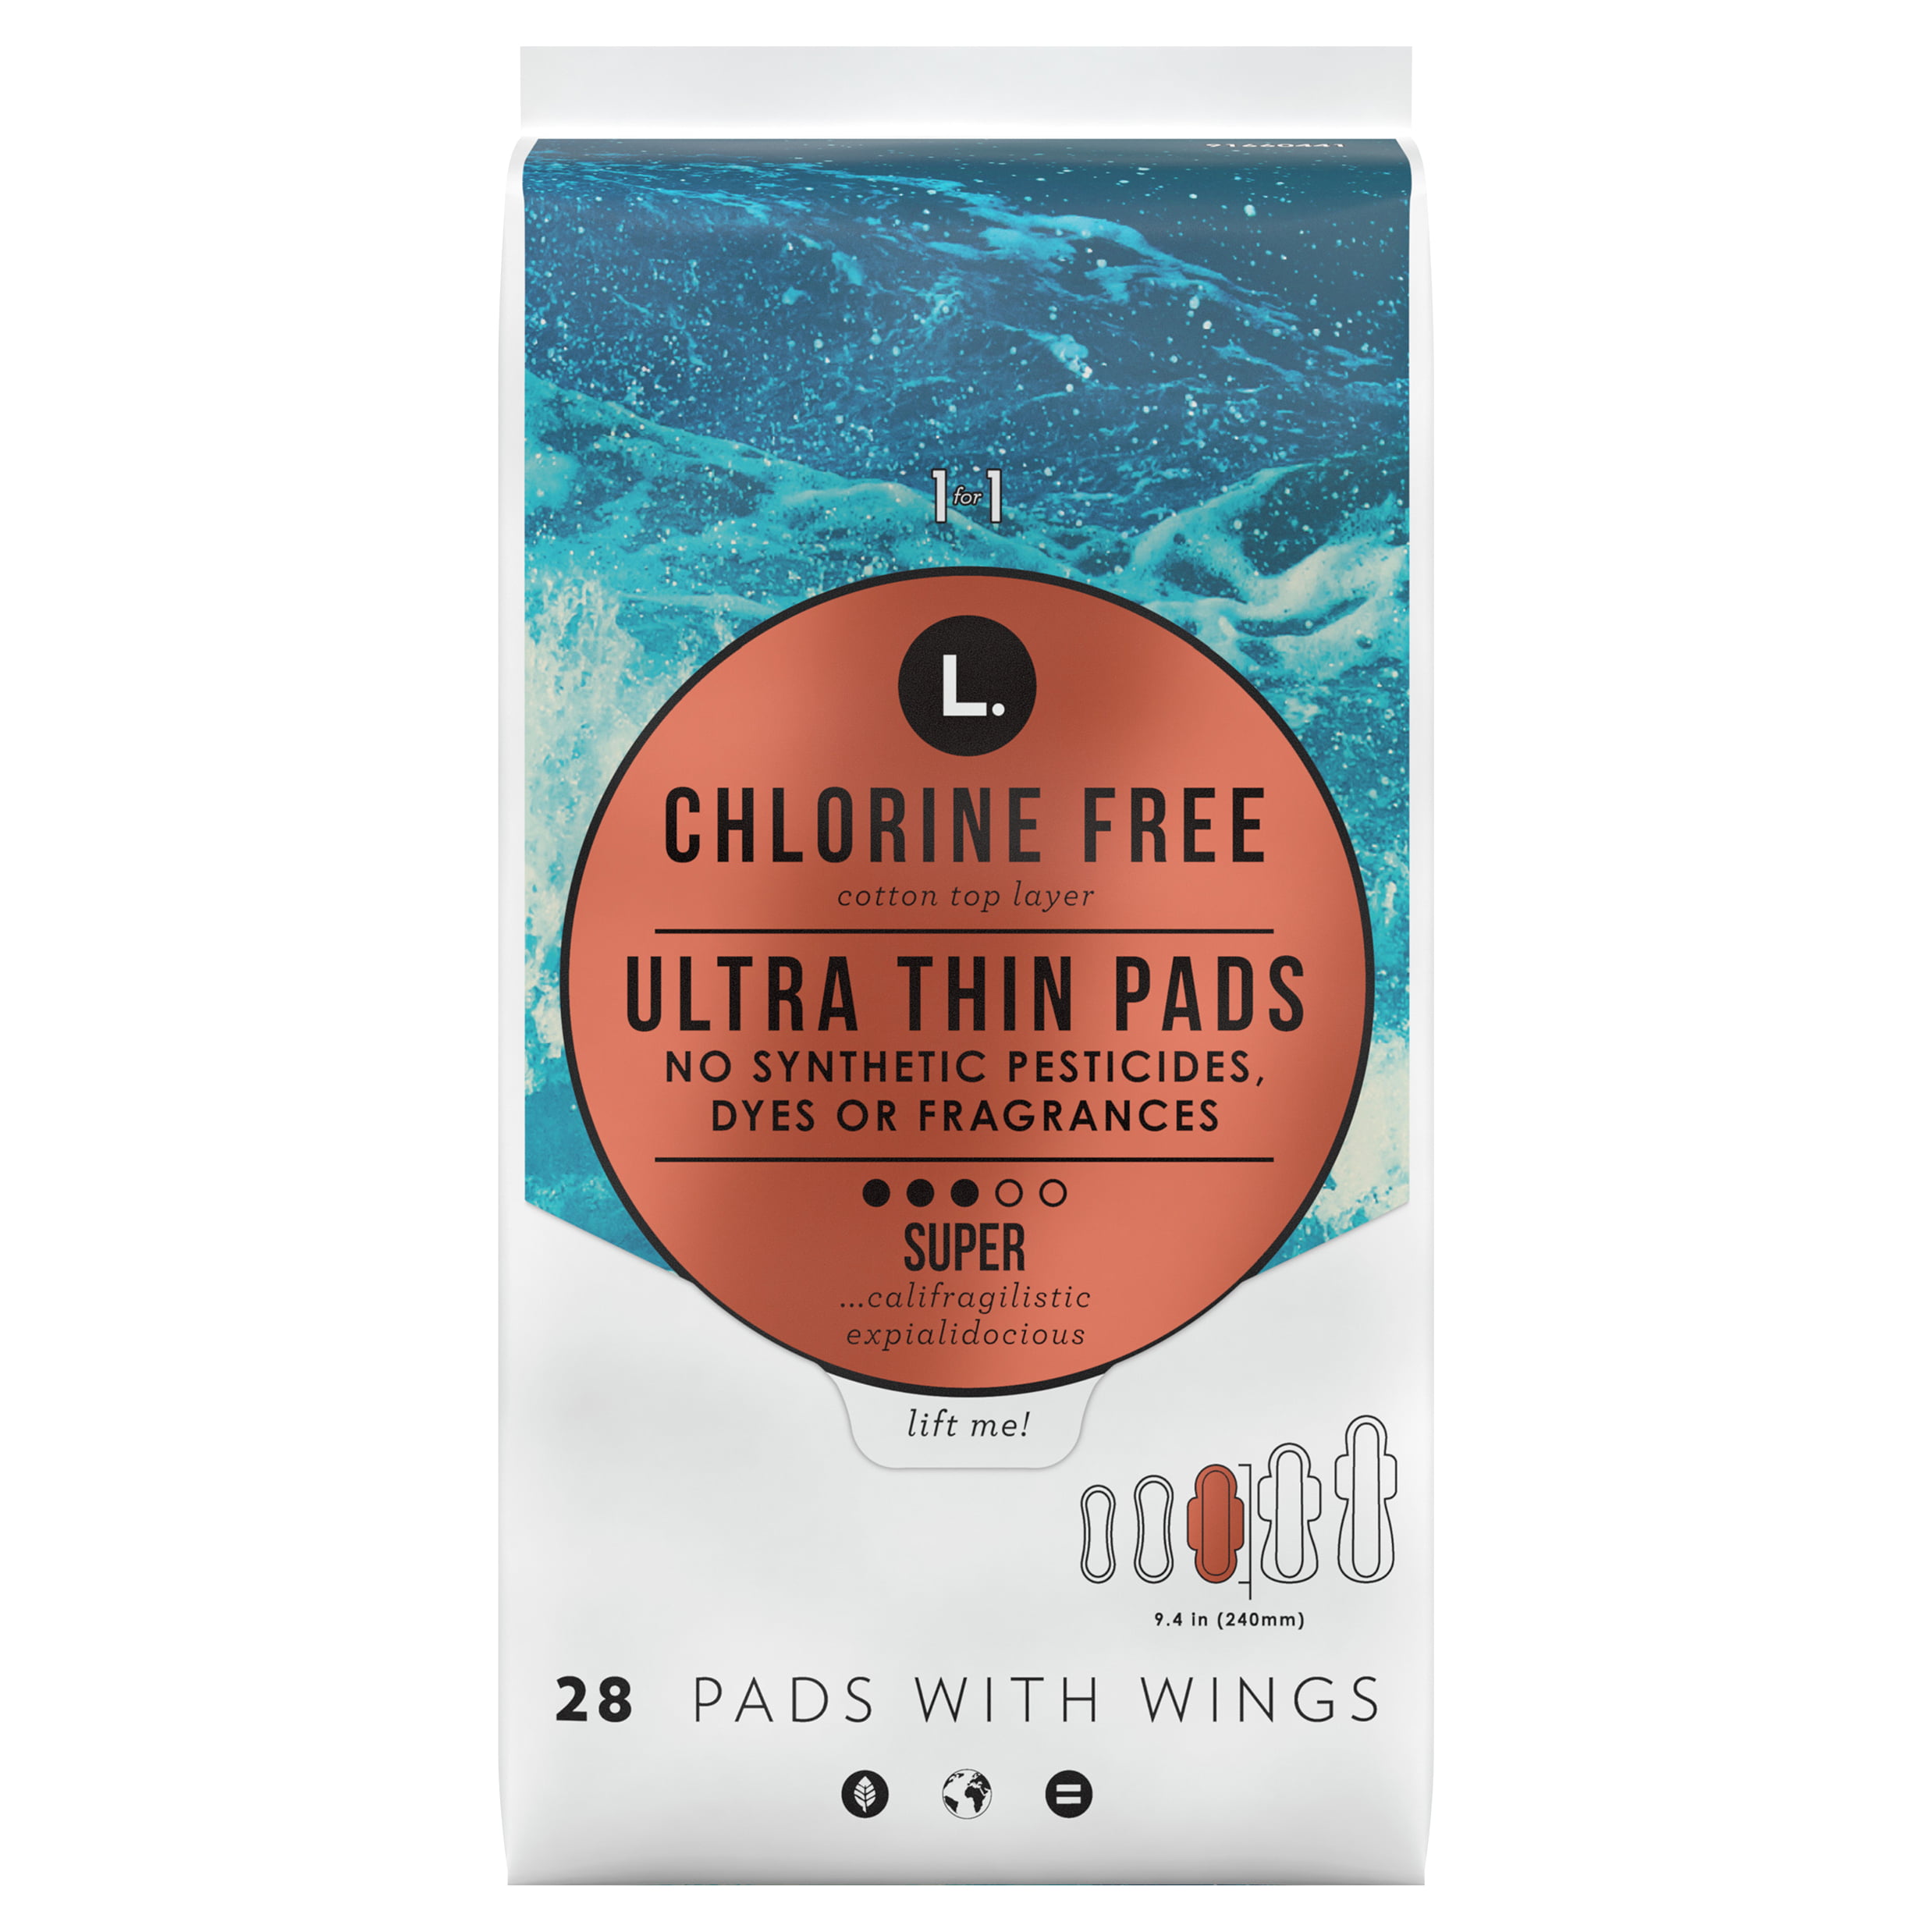 L. Chlorine Free Ultra Thin Super Absorbency Pads with Wings, 28 Count 